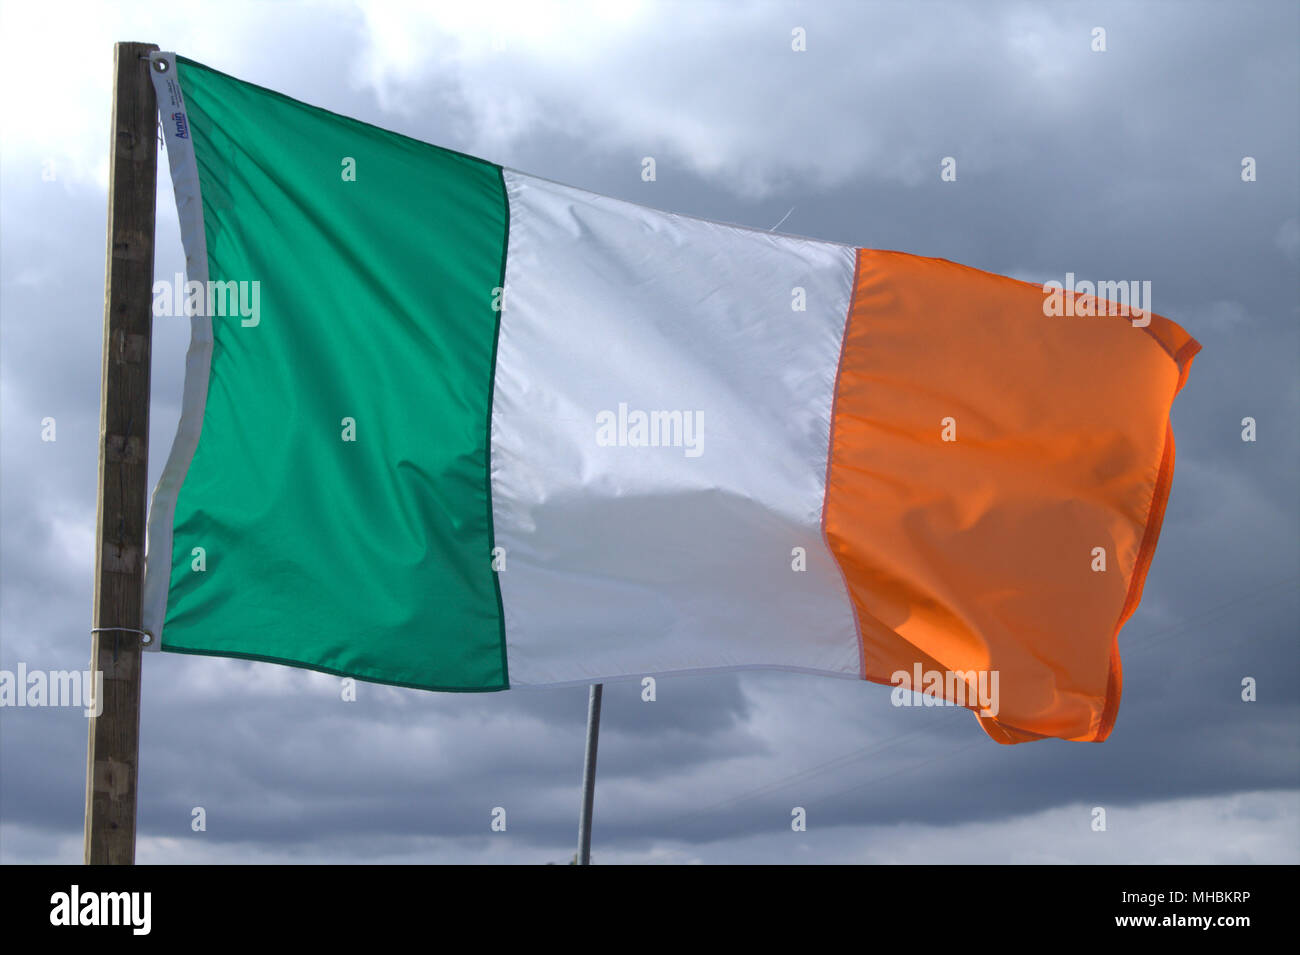 ireland national flag tricolour and ensign of the Republic of Ireland flying in a stiff wind against a stormy sky. Stock Photo